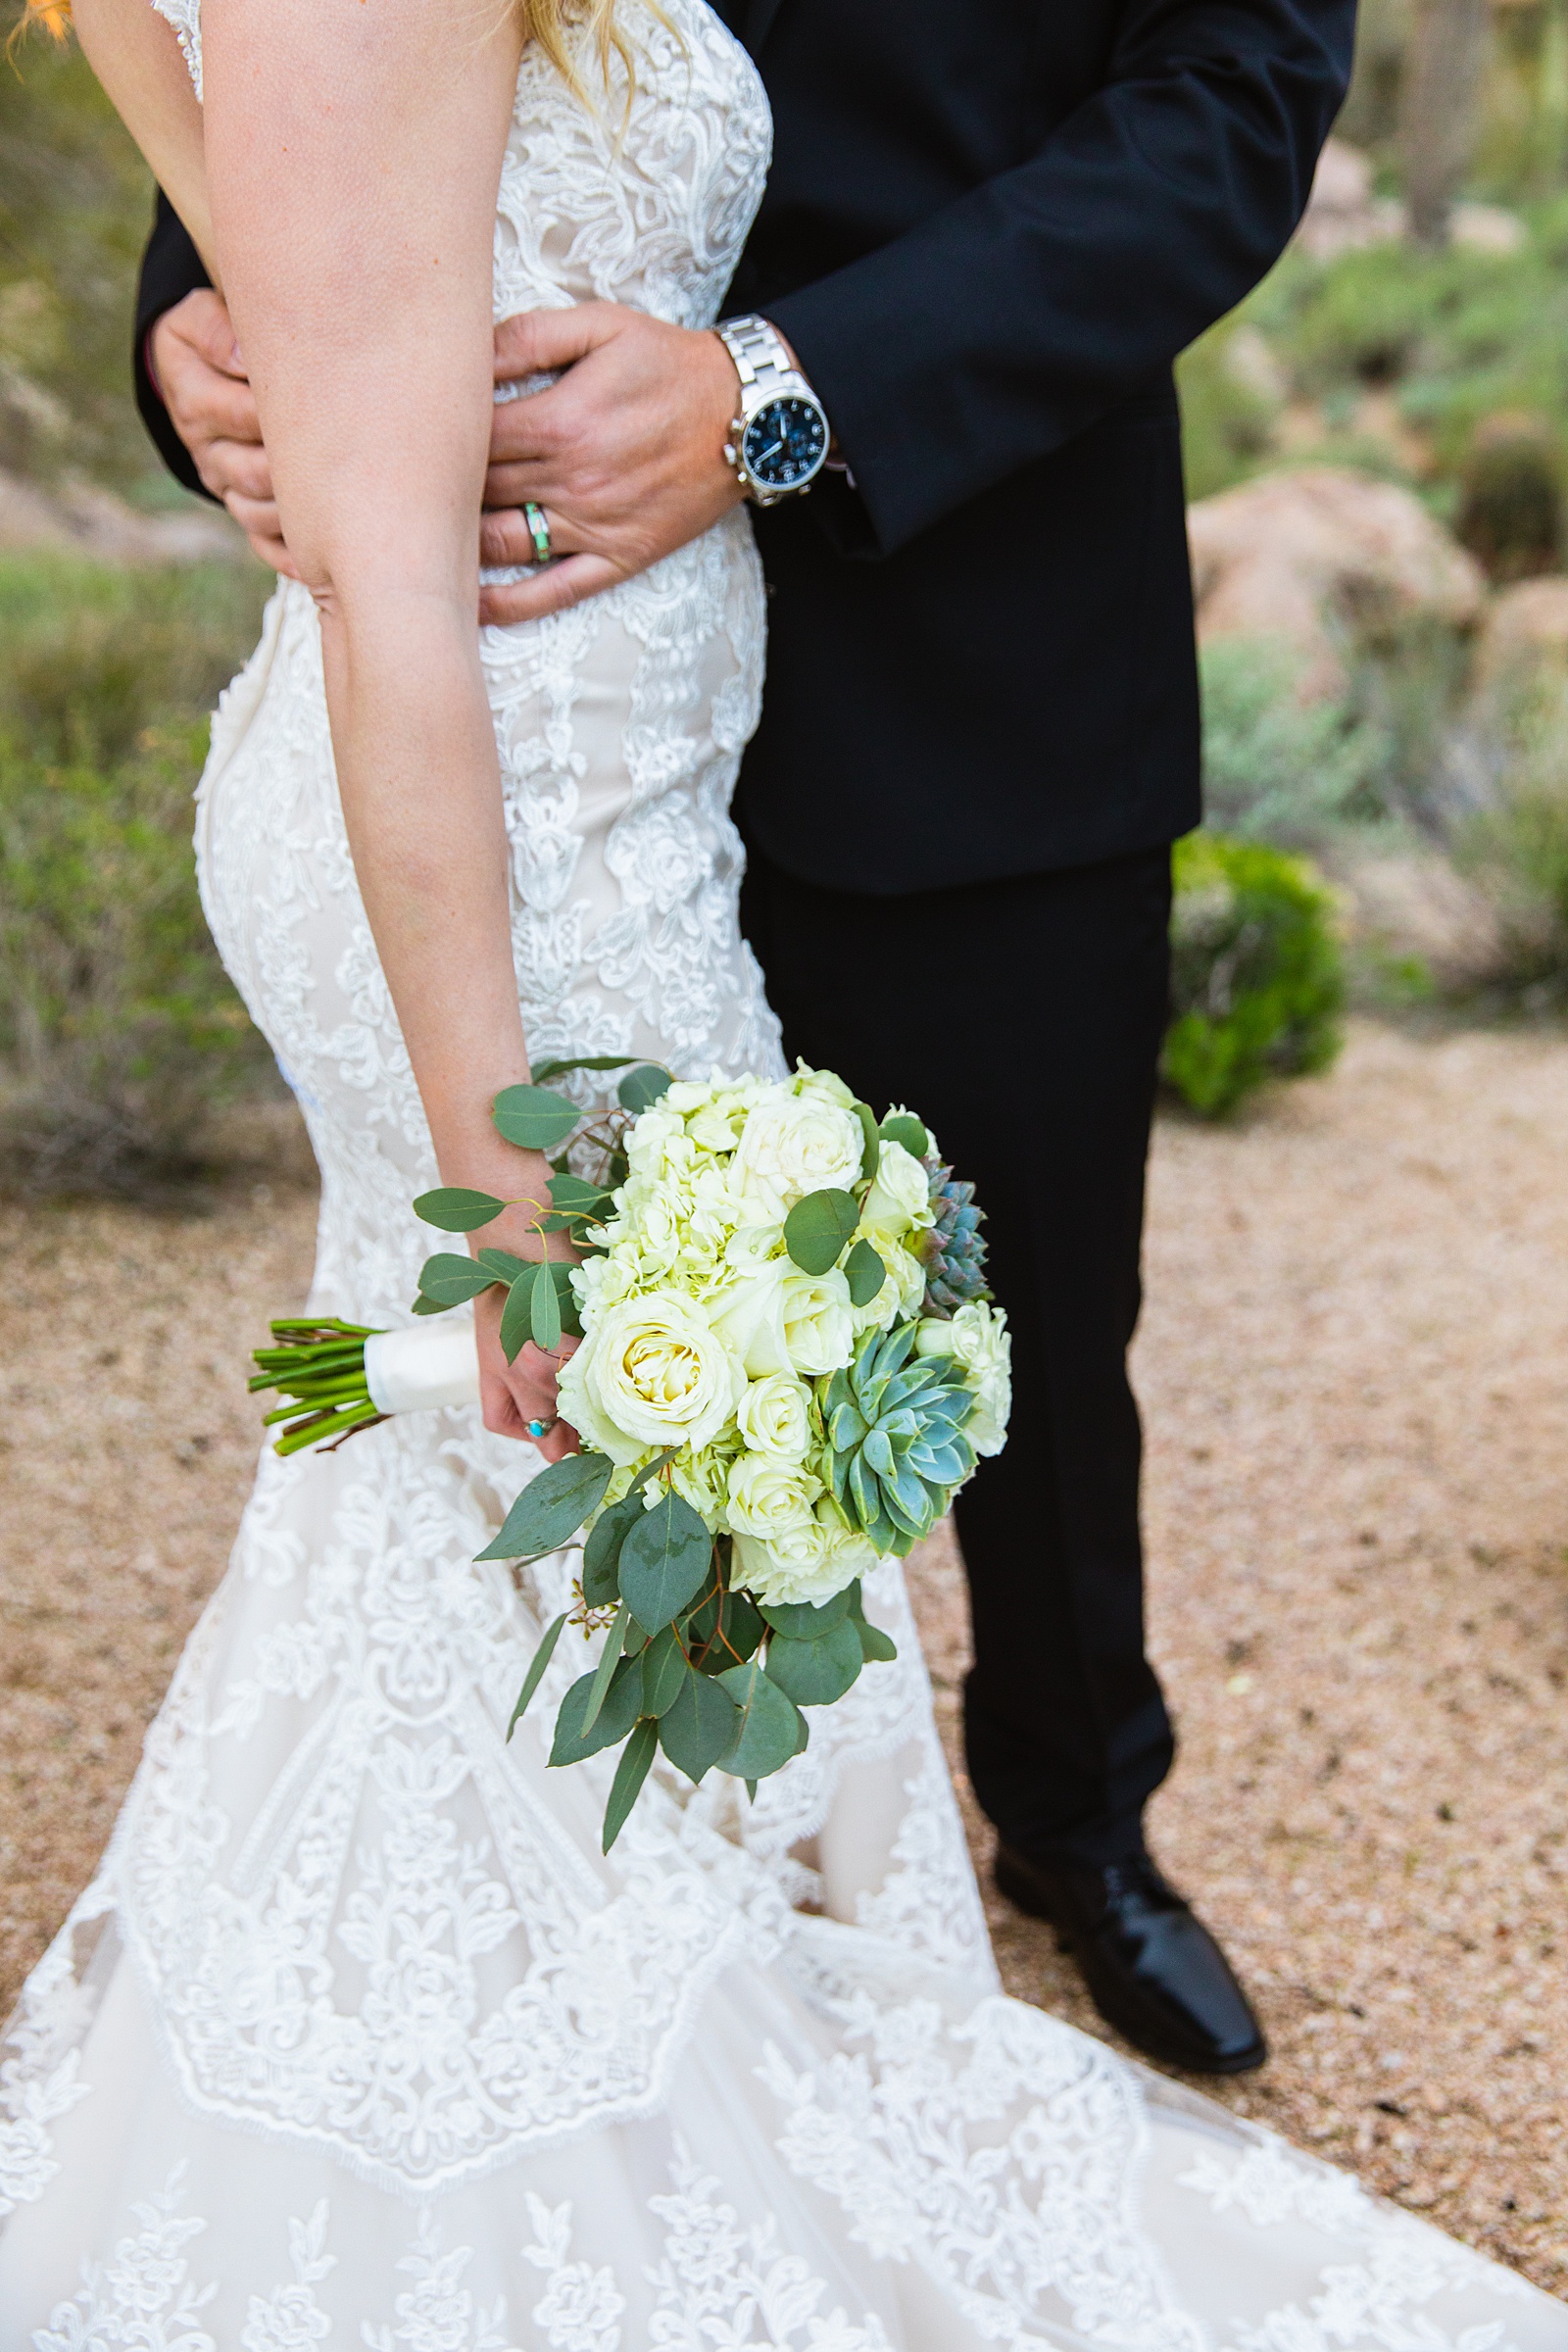 Bride holding a white and greenery wedding bouquet while her groom holds her at a Troon North wedding by Scottsdale wedding photographer PMA Photography.